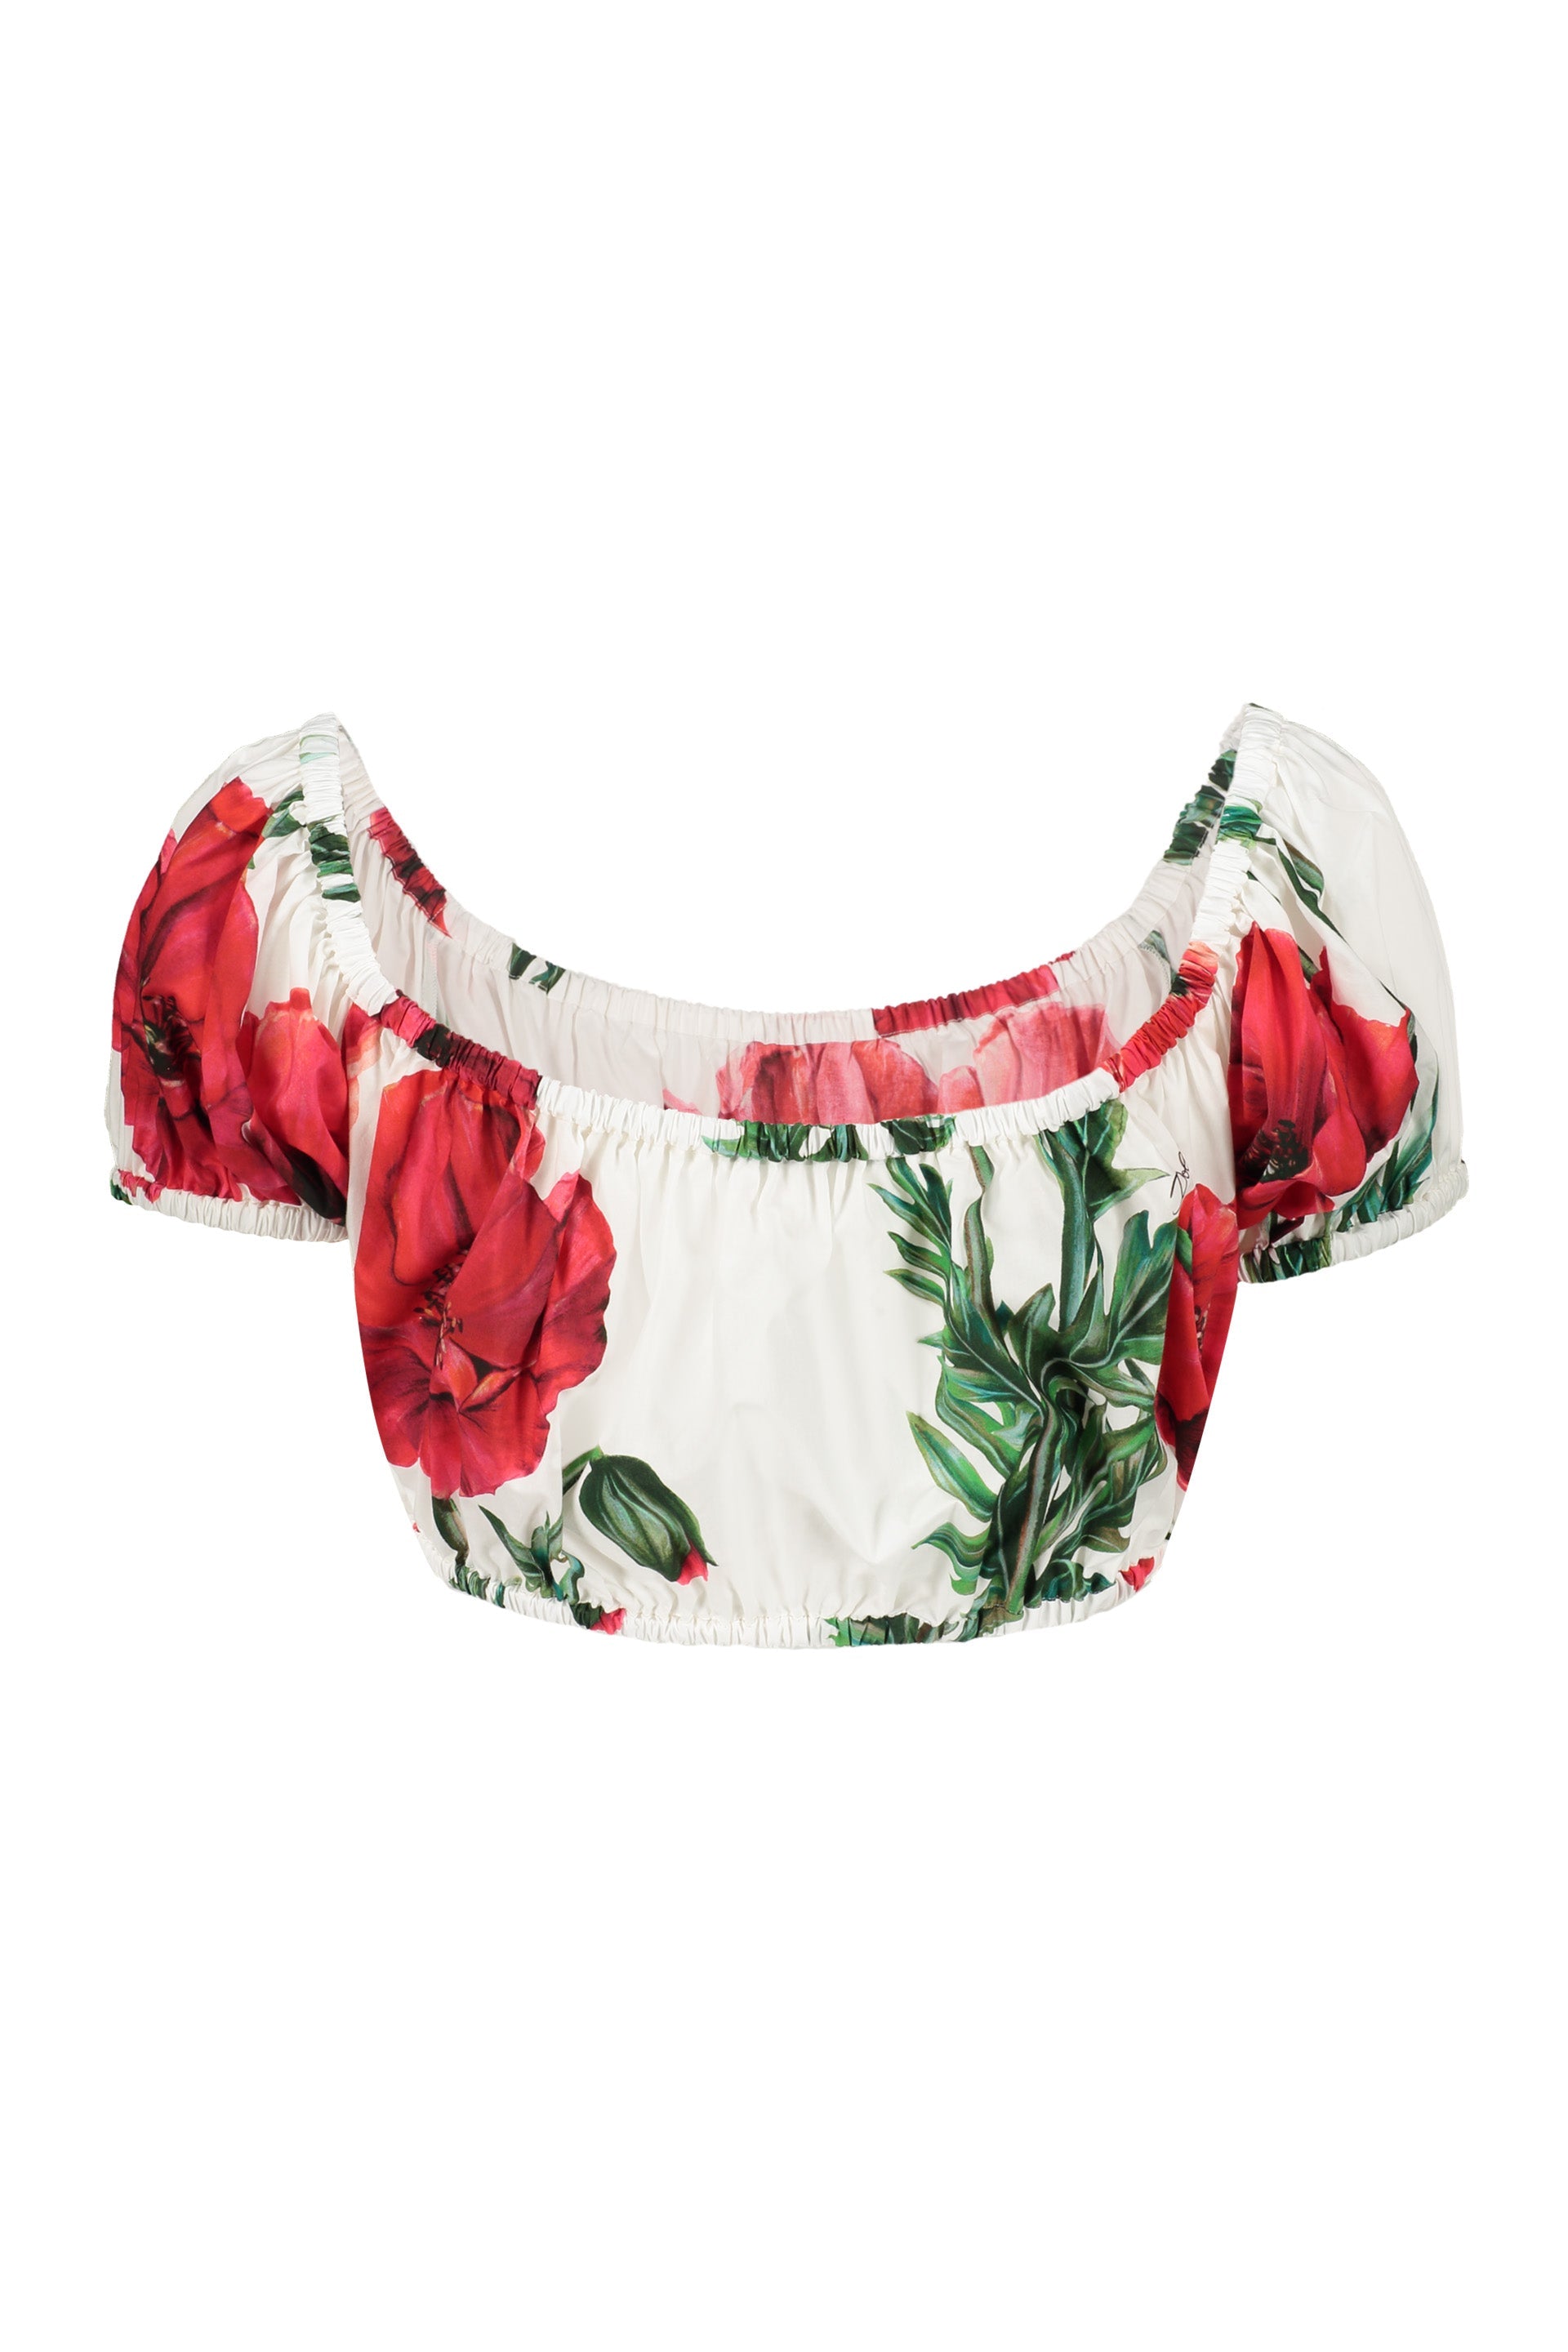 Dolce-Gabbana-OUTLET-SALE-Cotton-crop-top-Shirts-ARCHIVE-COLLECTION-2.jpg